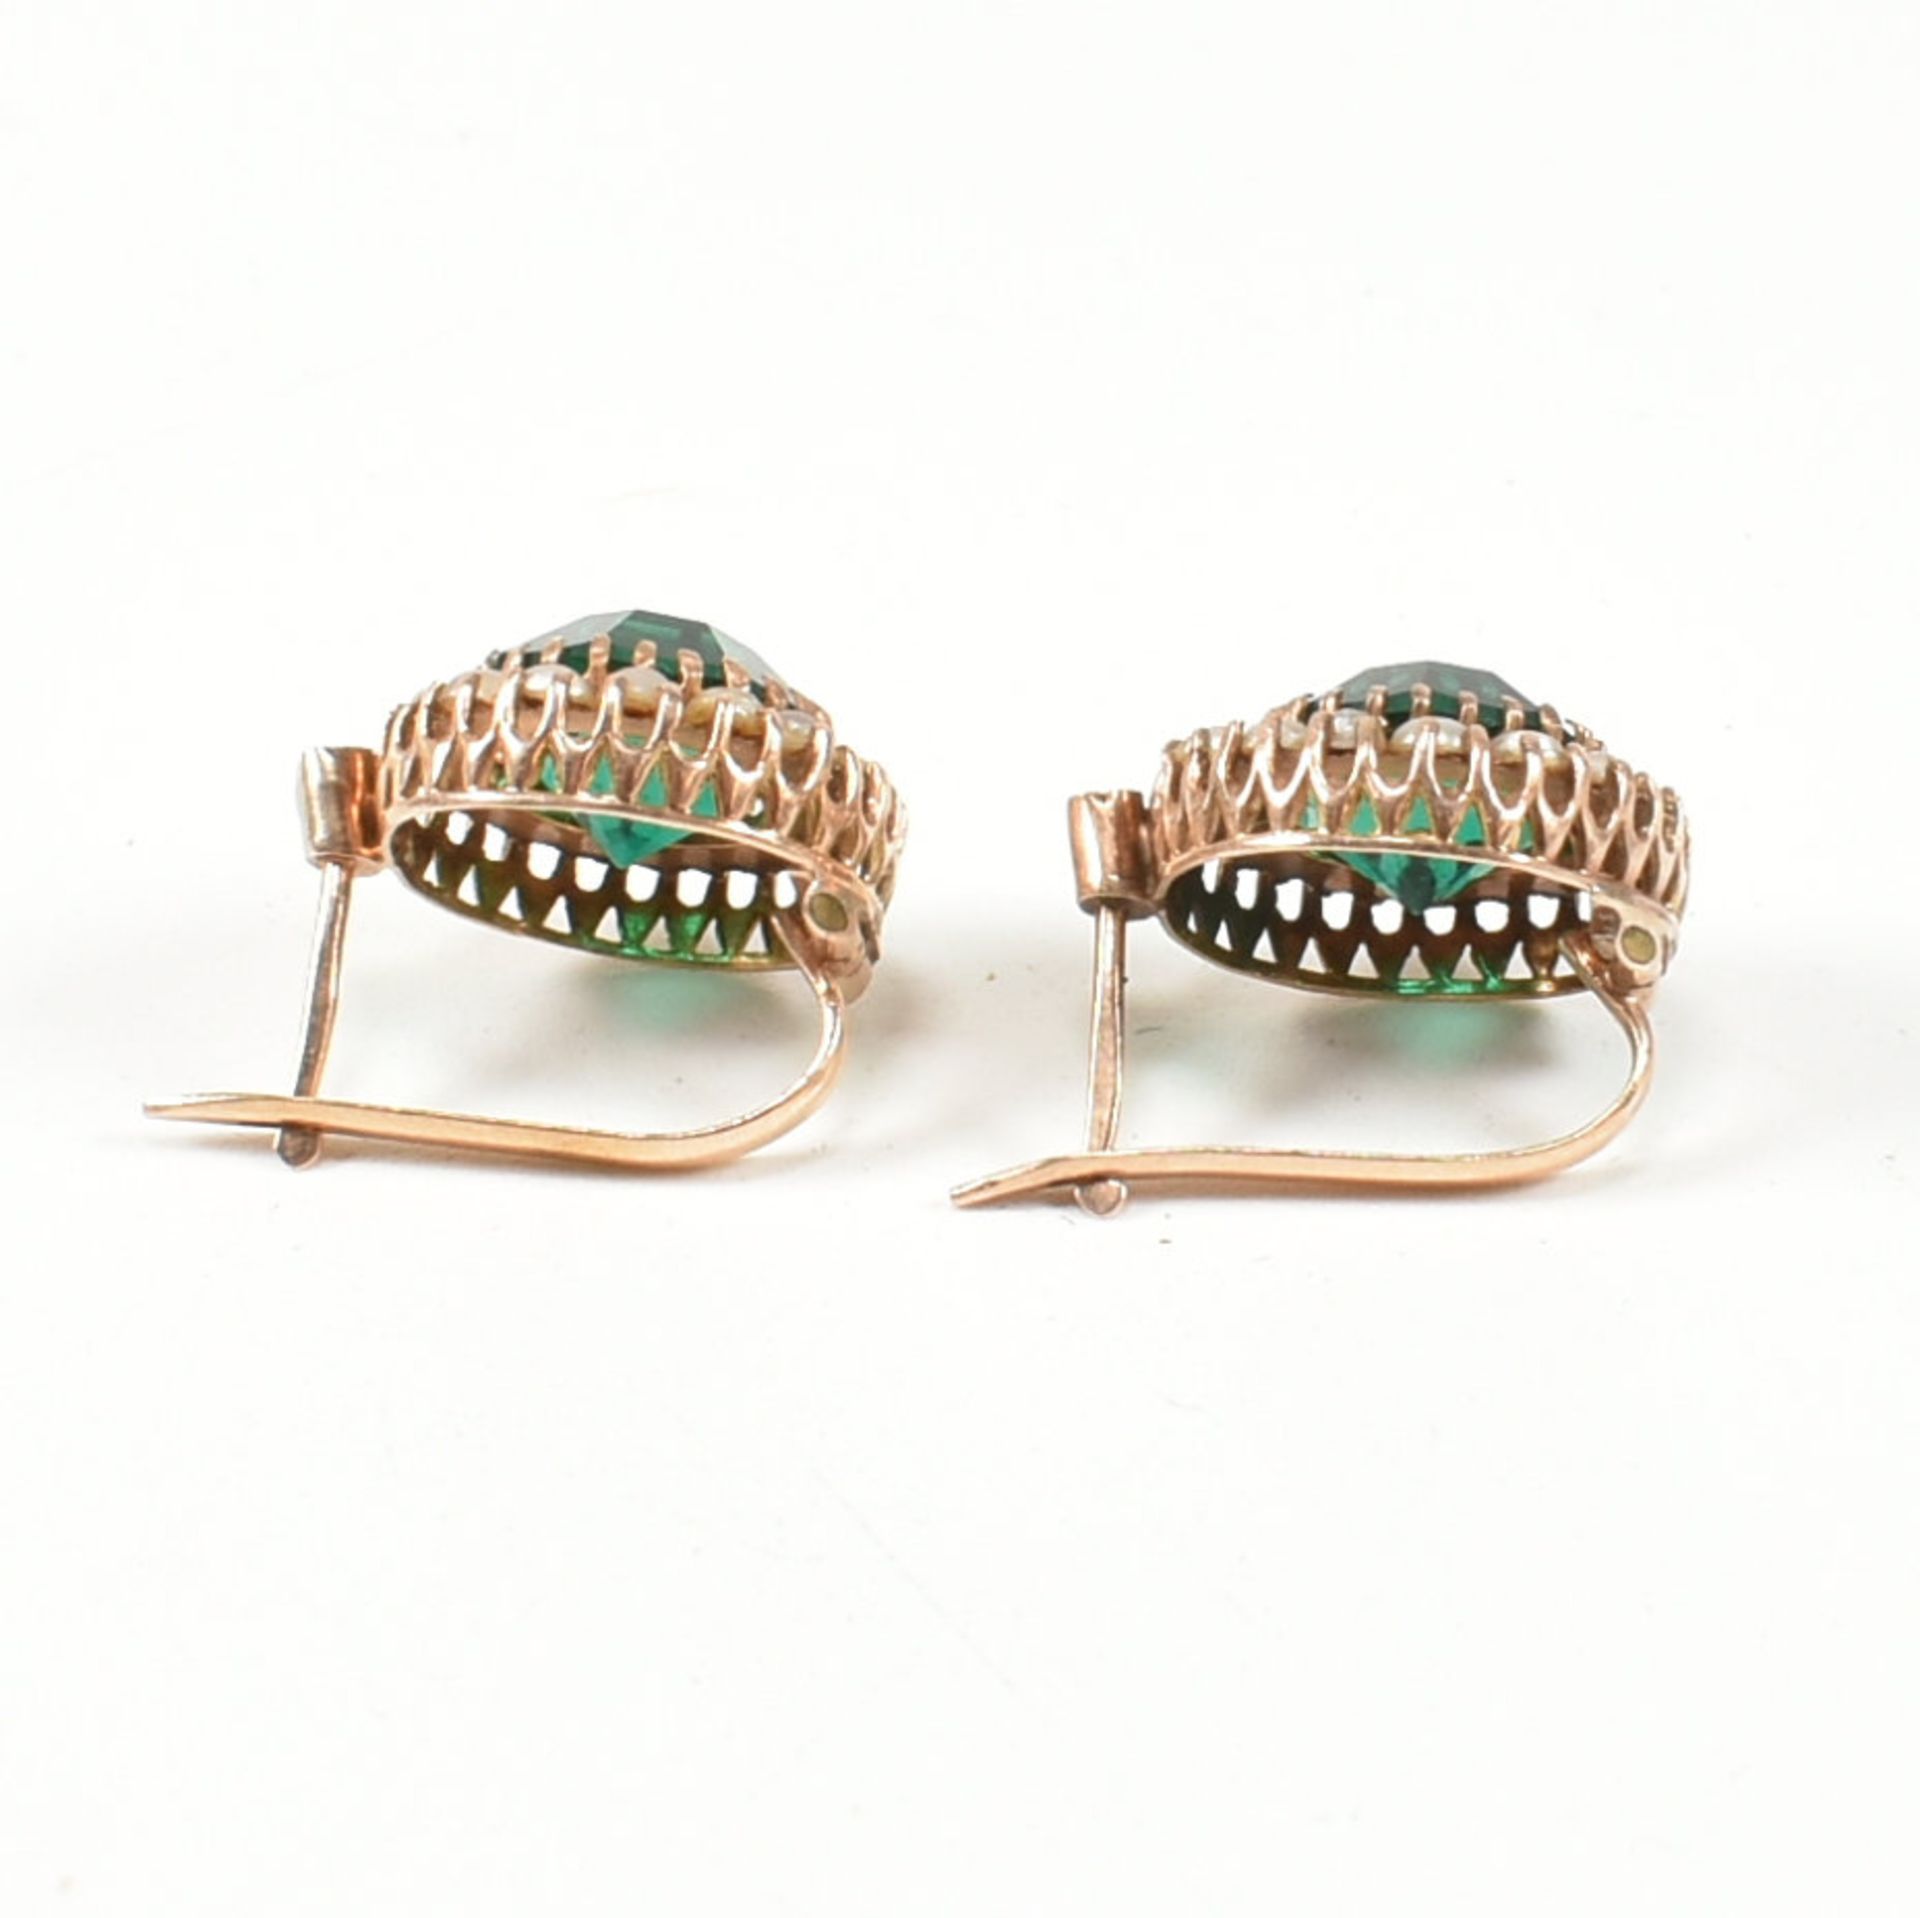 GOLD PEARL & GREEN PASTE EARRINGS - Image 3 of 7